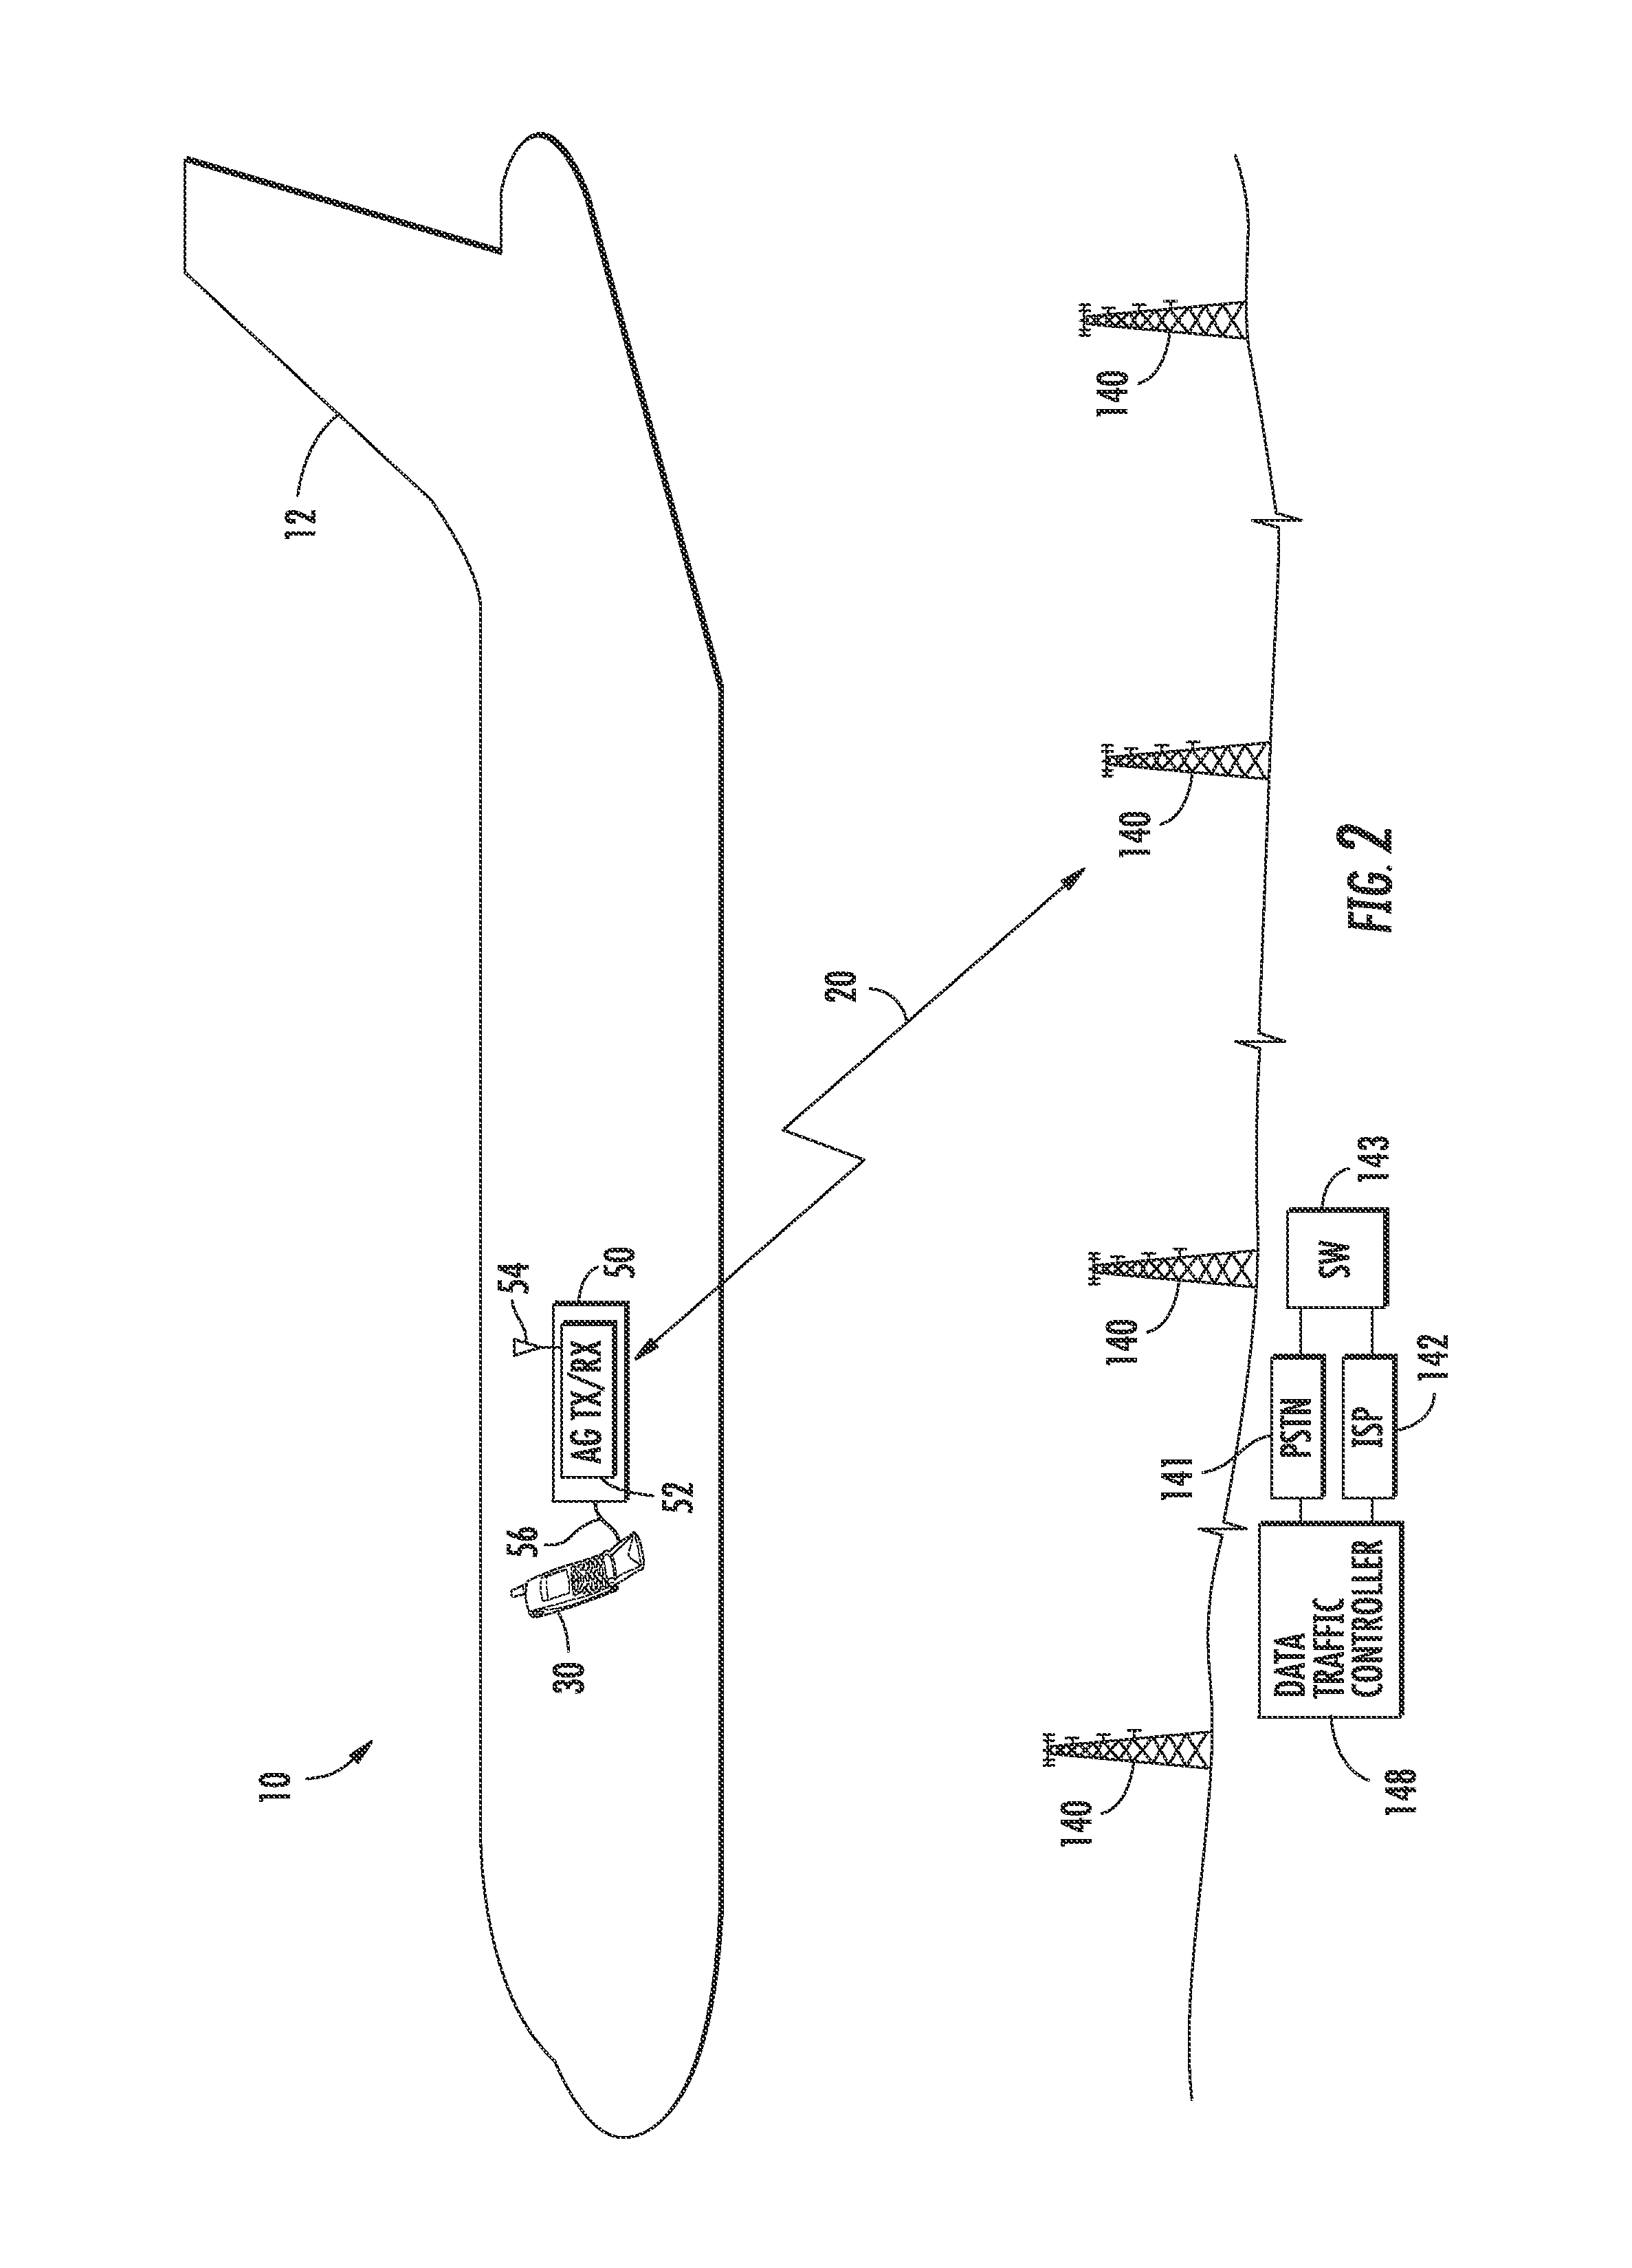 Registration of a personal electronic device (PED) with an aircraft ife system using a ped generated registration identifier and associated methods